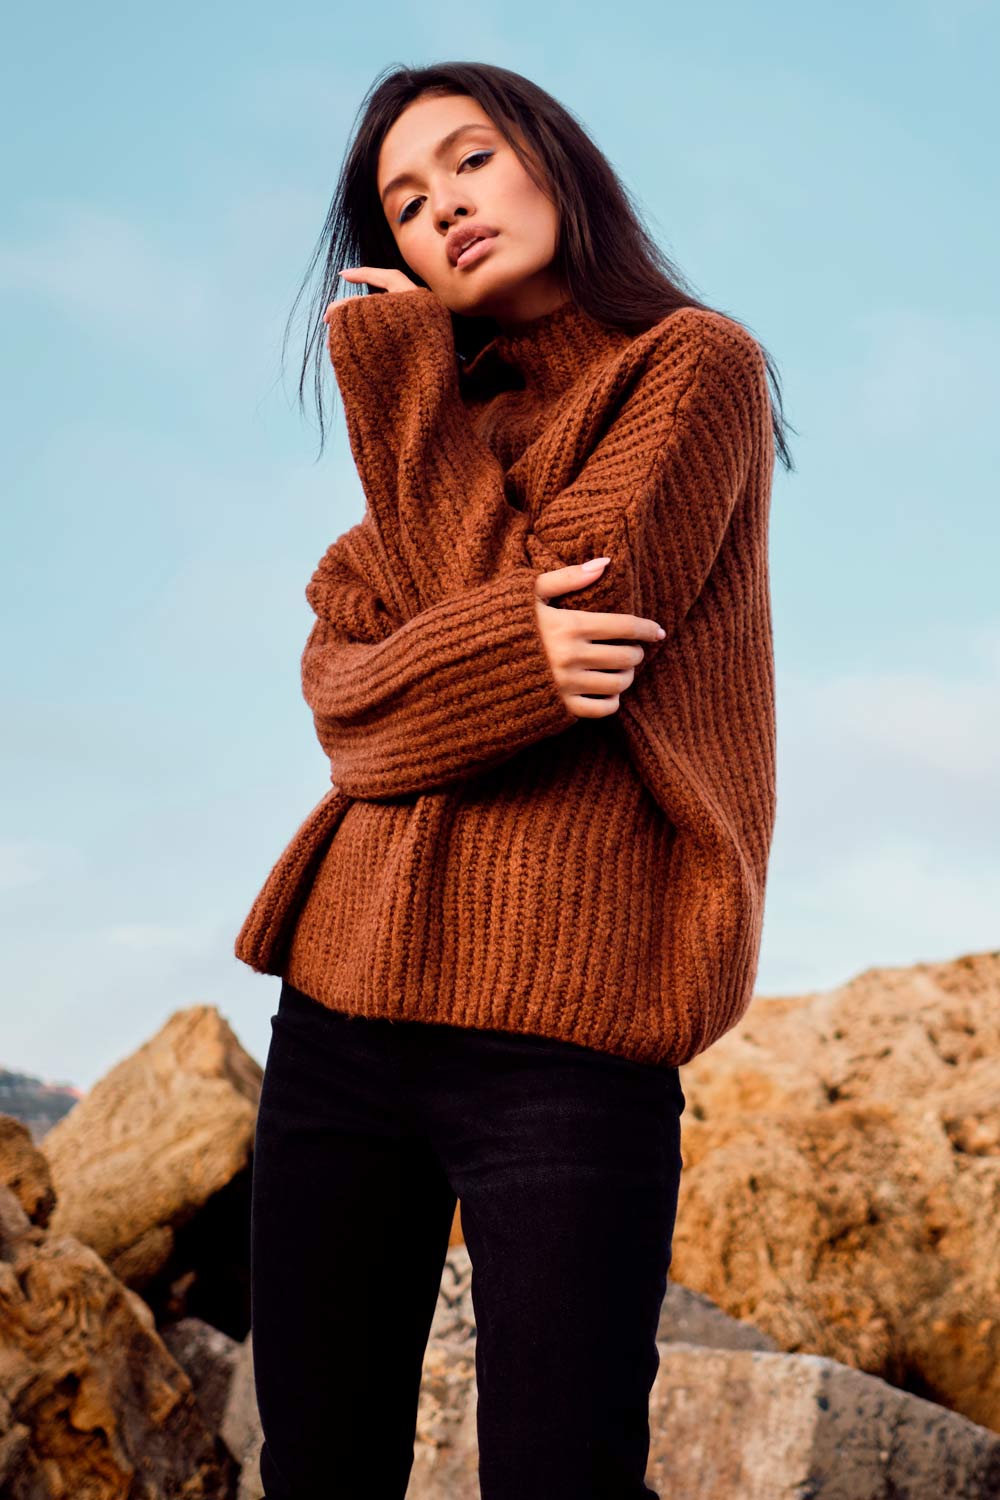 Oversized Sweater Outfit Ideas